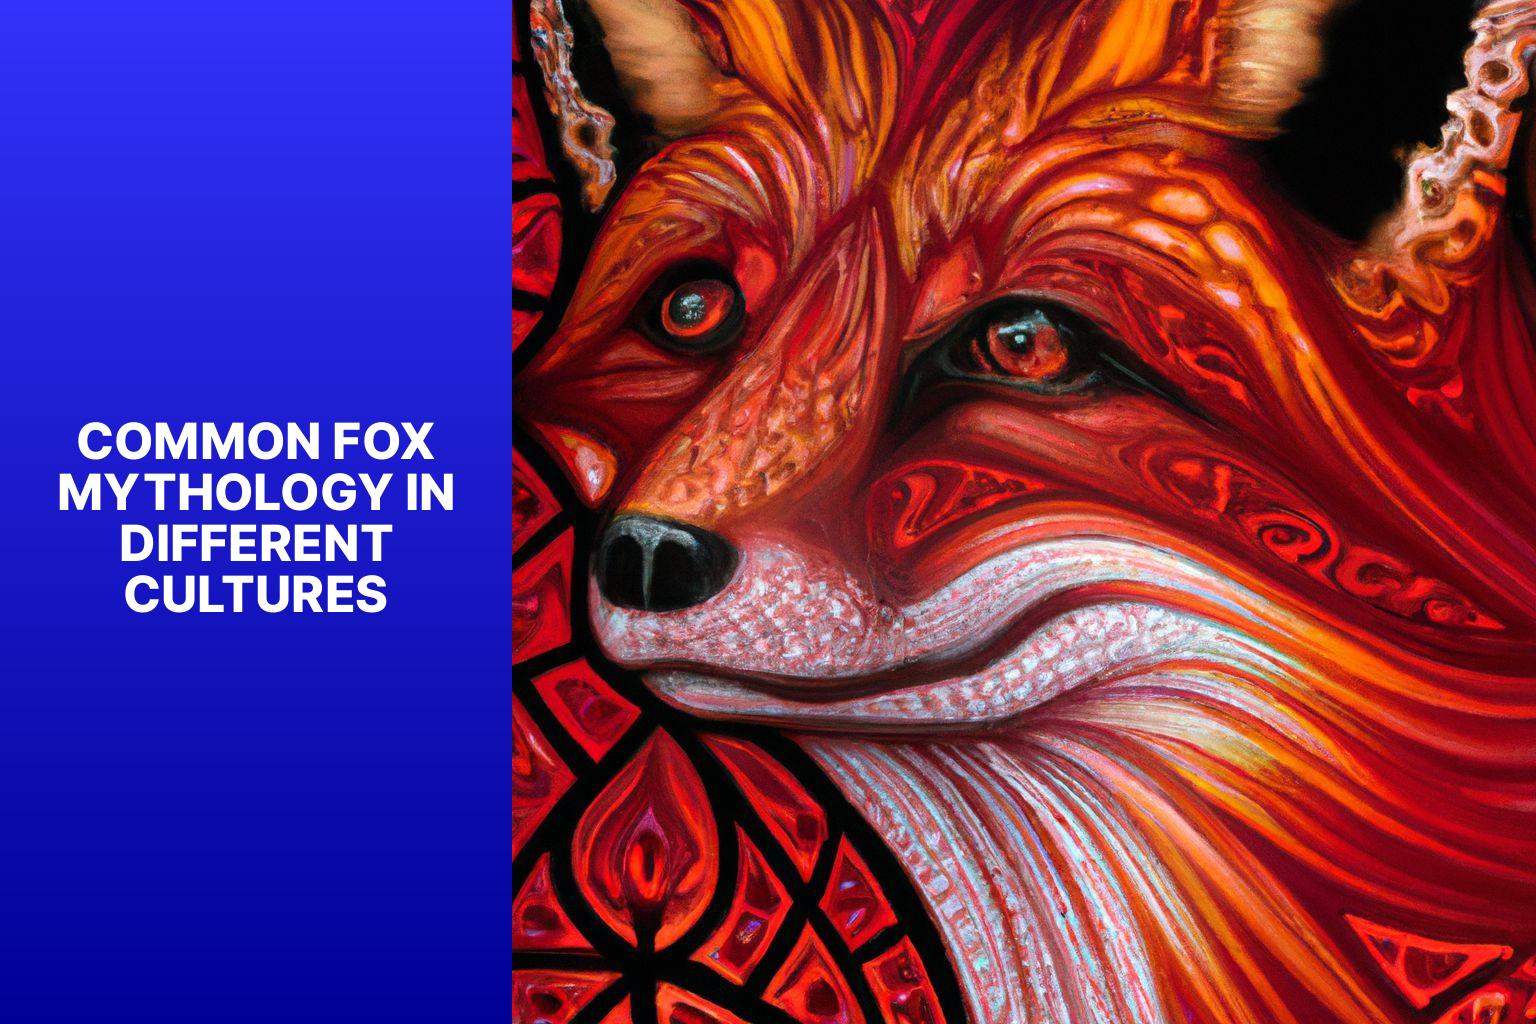 Common Fox Mythology in Different Cultures - Fox Myths in Modern Times 